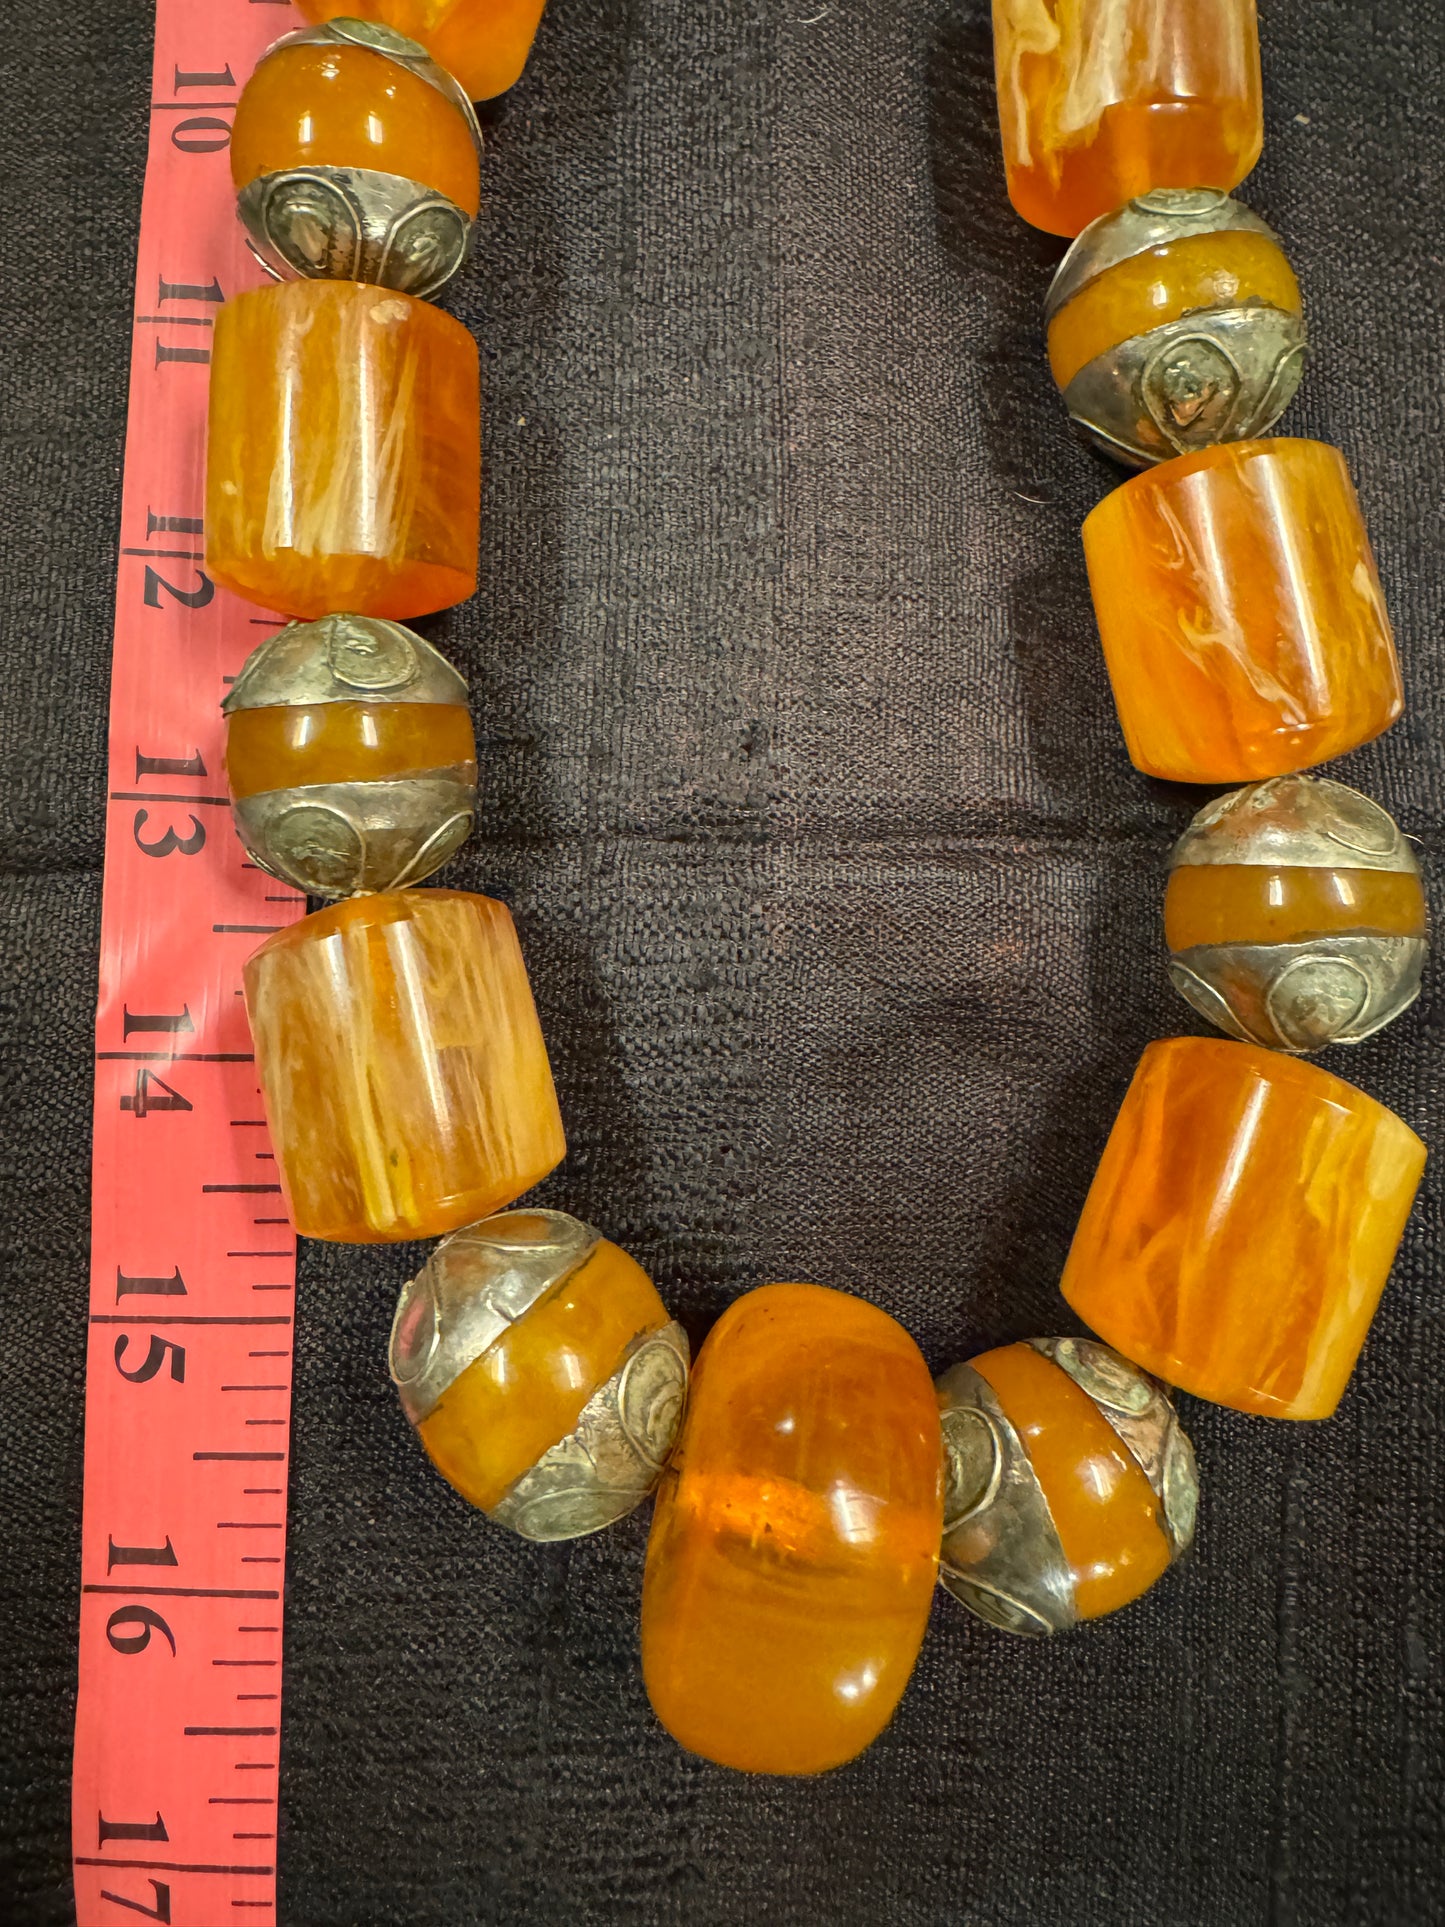 AMBER MAMMOTH NECKLACE